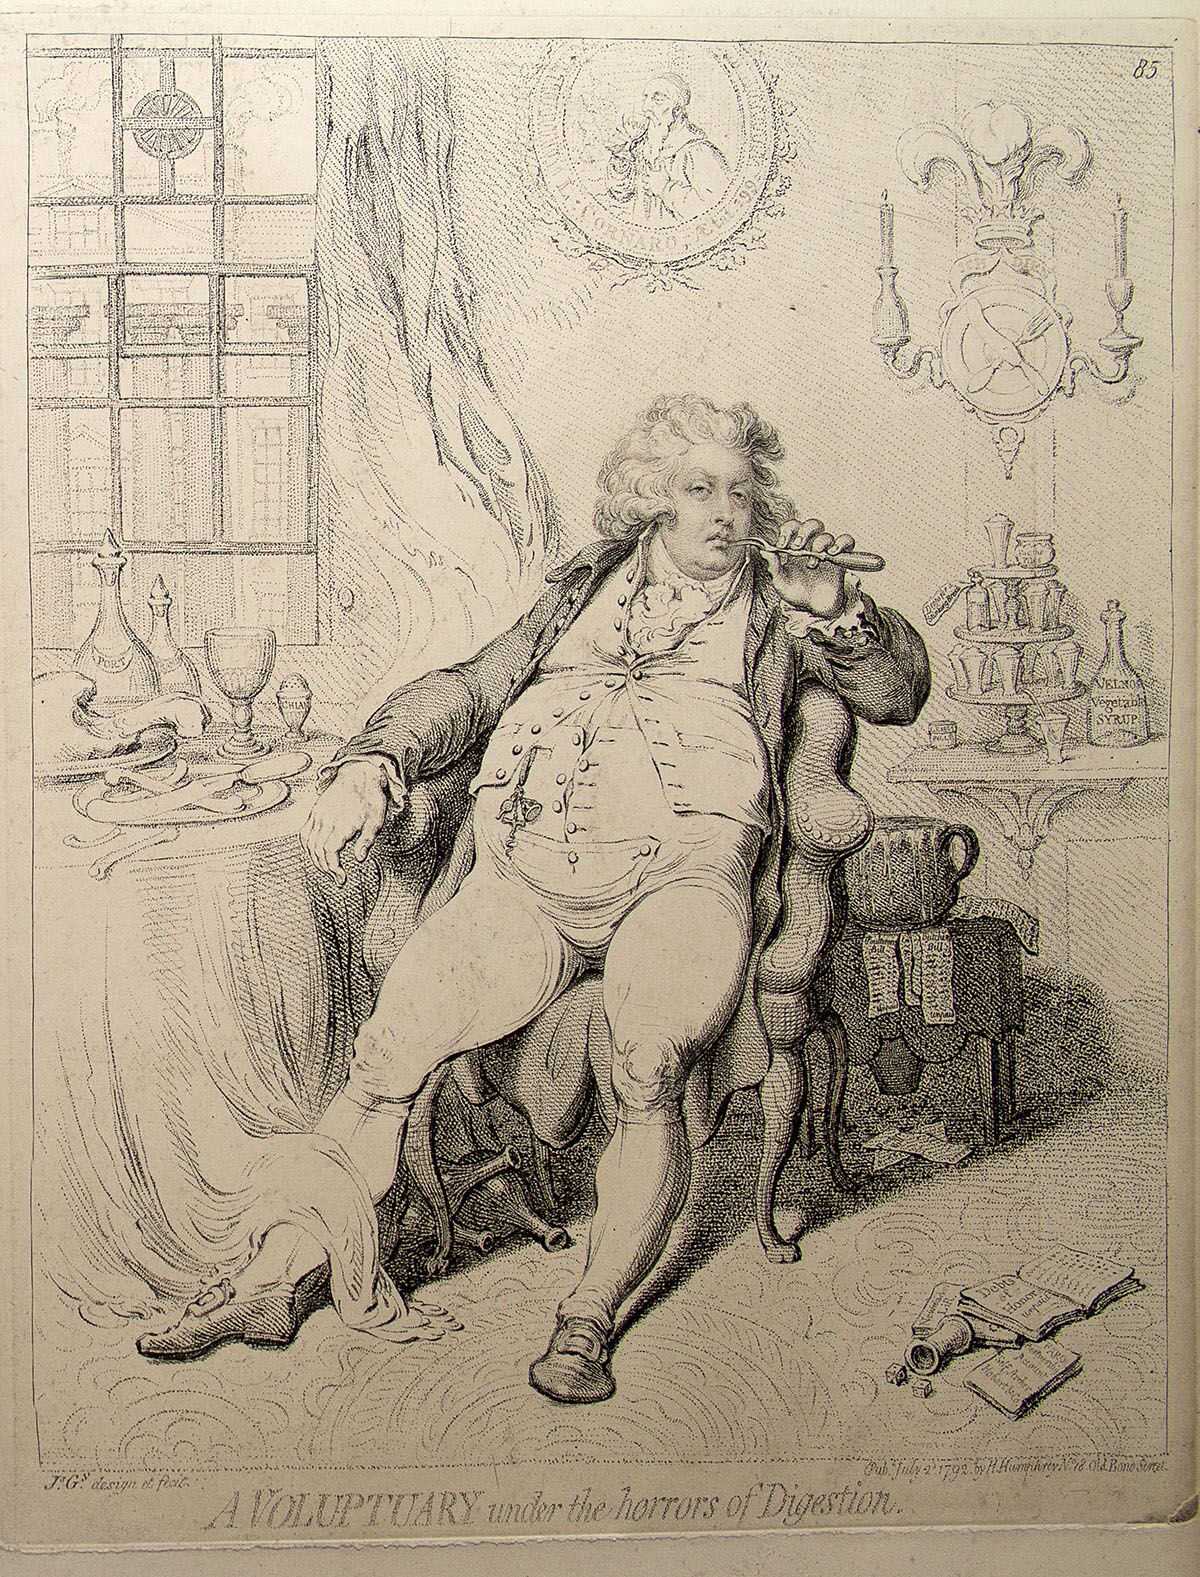 James Gillray's "A Voluptuary Under the Horrors of Digestion," 1793 (printed 1851, Bohn edition), etching